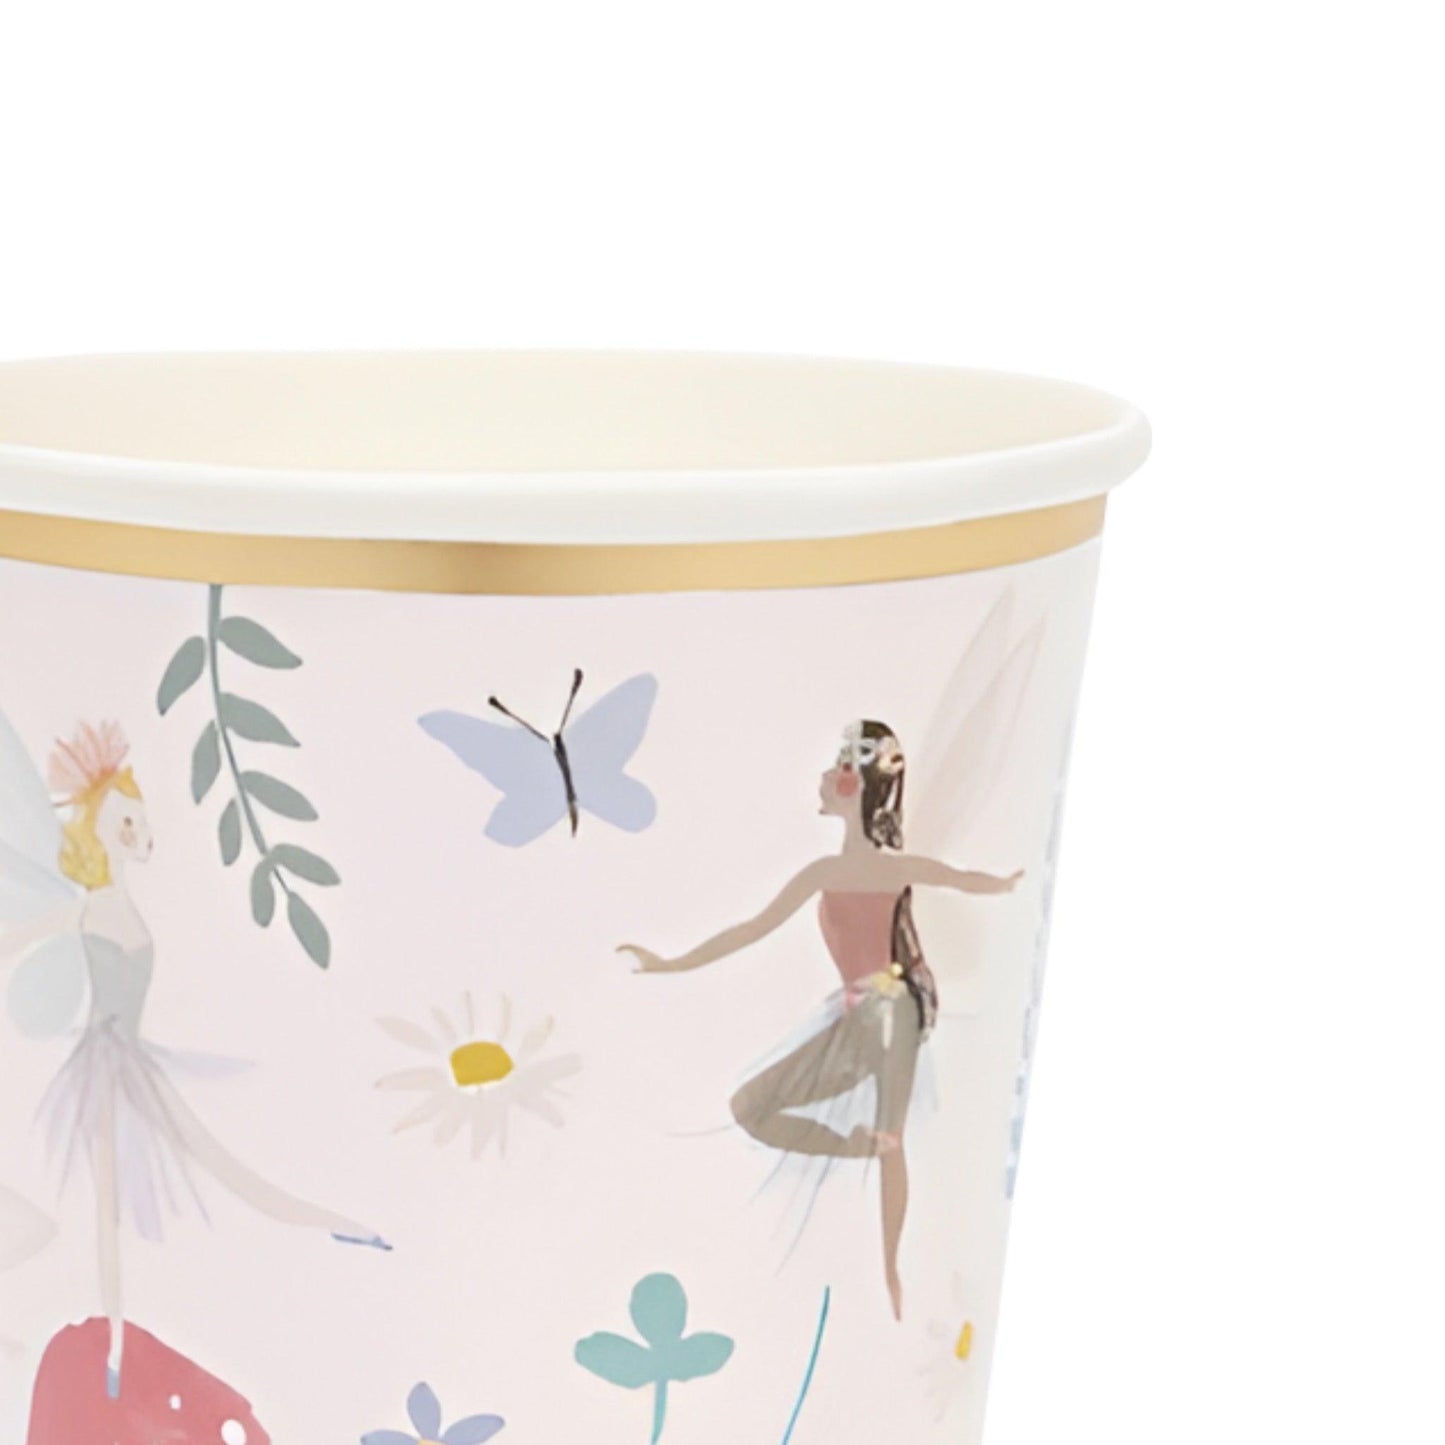 Meri Meri Fairy Cup in pale pink with Fairies, flowers and red toadstools.